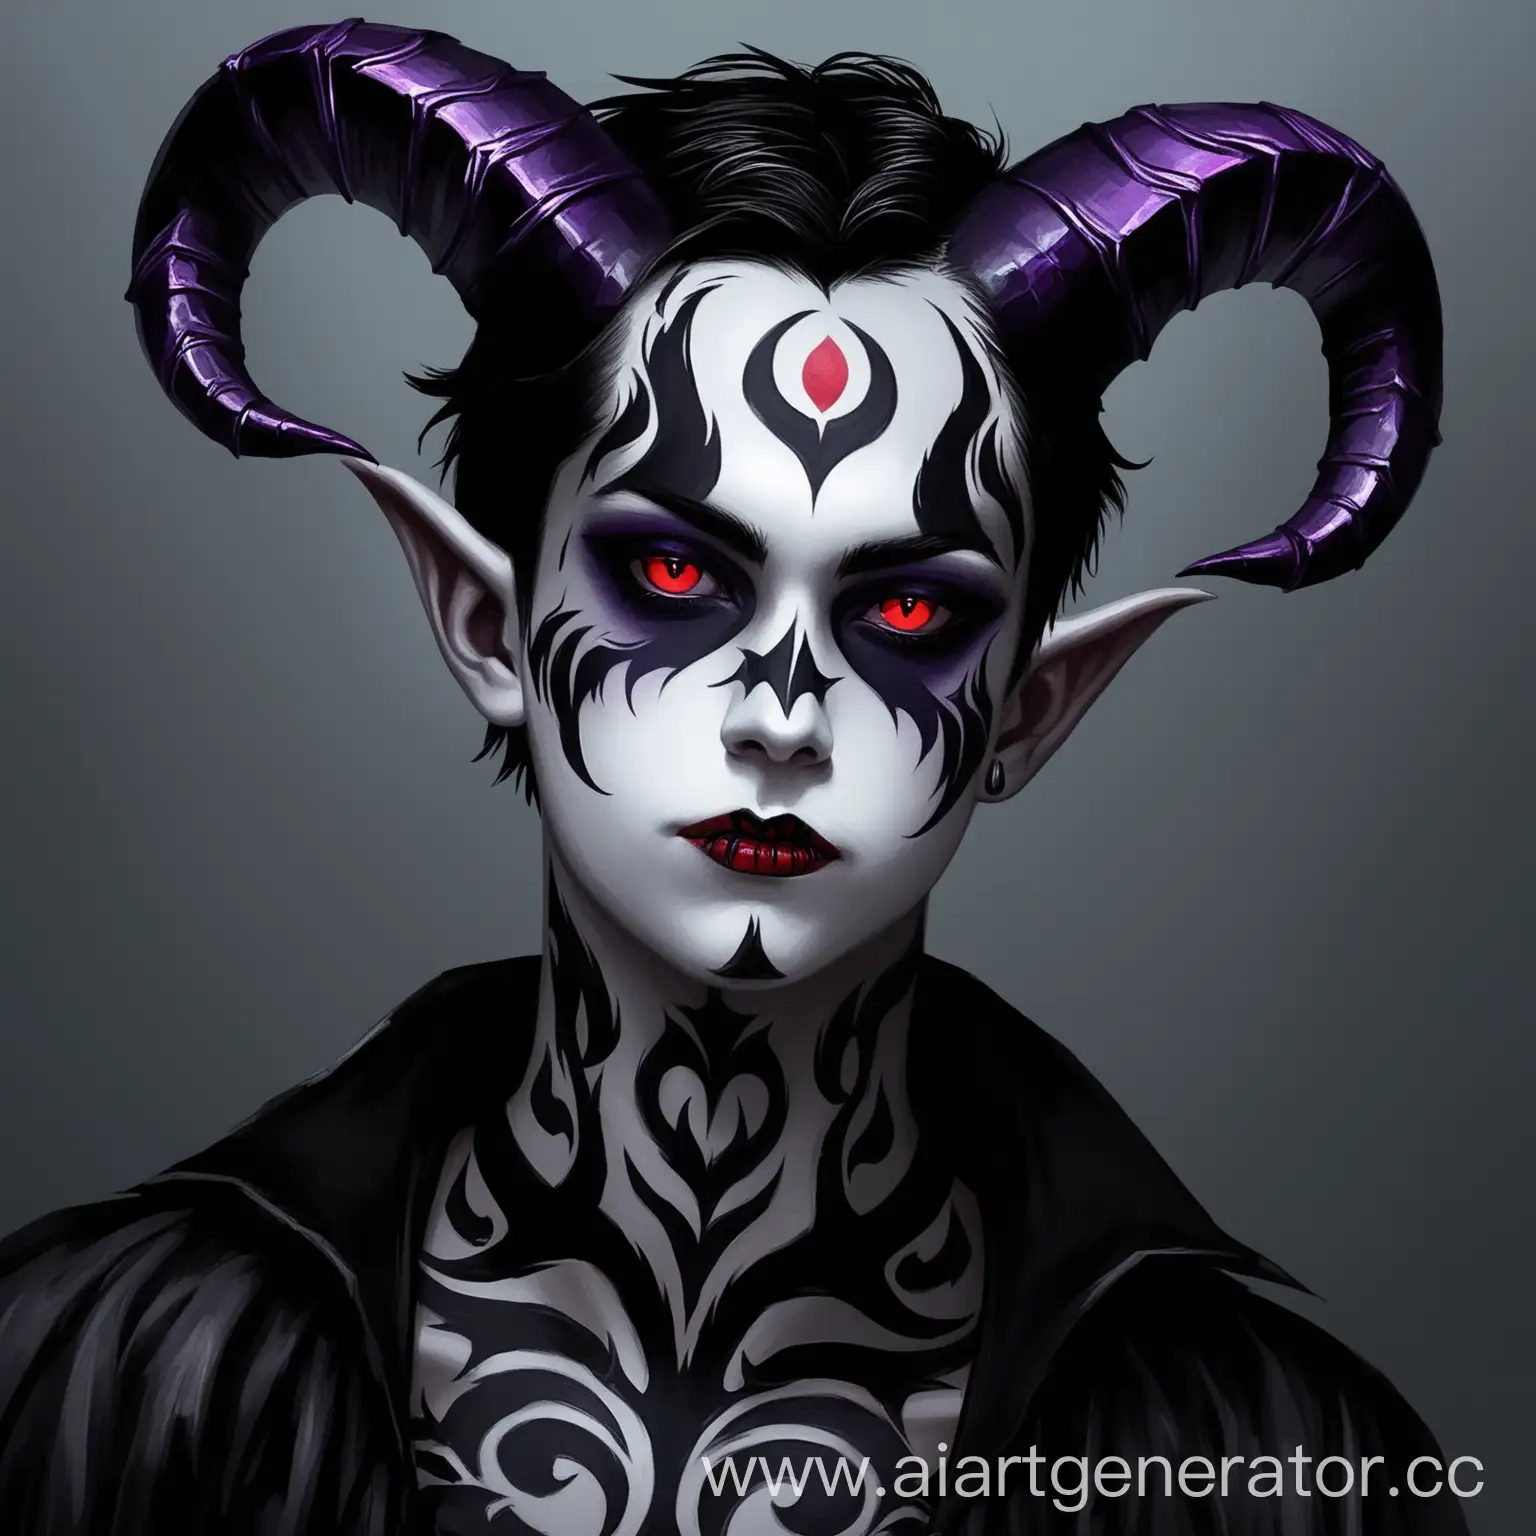 Sinister-Young-Man-with-Maleficent-Horns-and-Gothic-Face-Tattoo